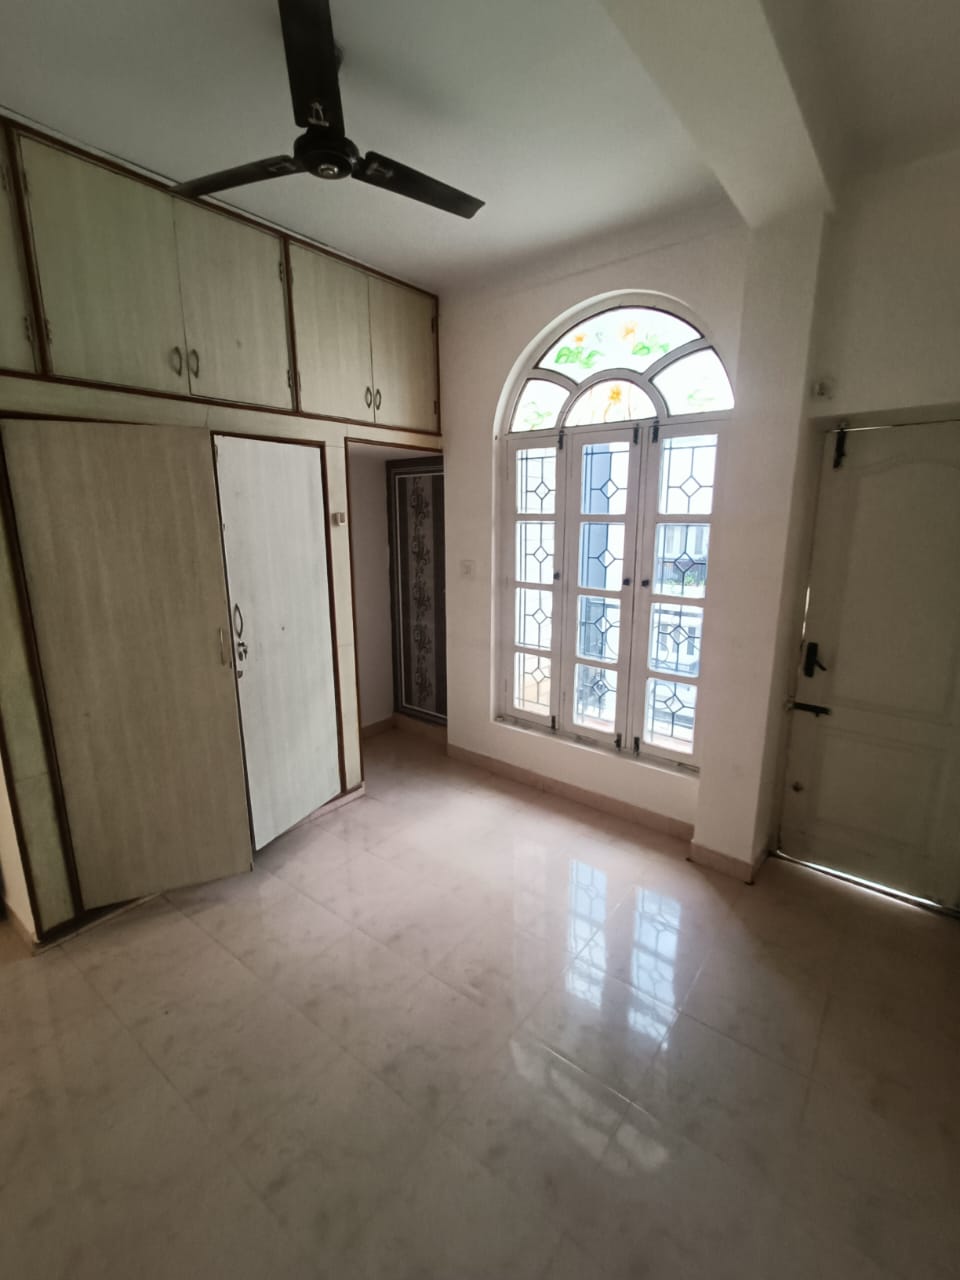 3 BHK Independent House for Lease Only at JAML2 - 2080 in Hongasandra